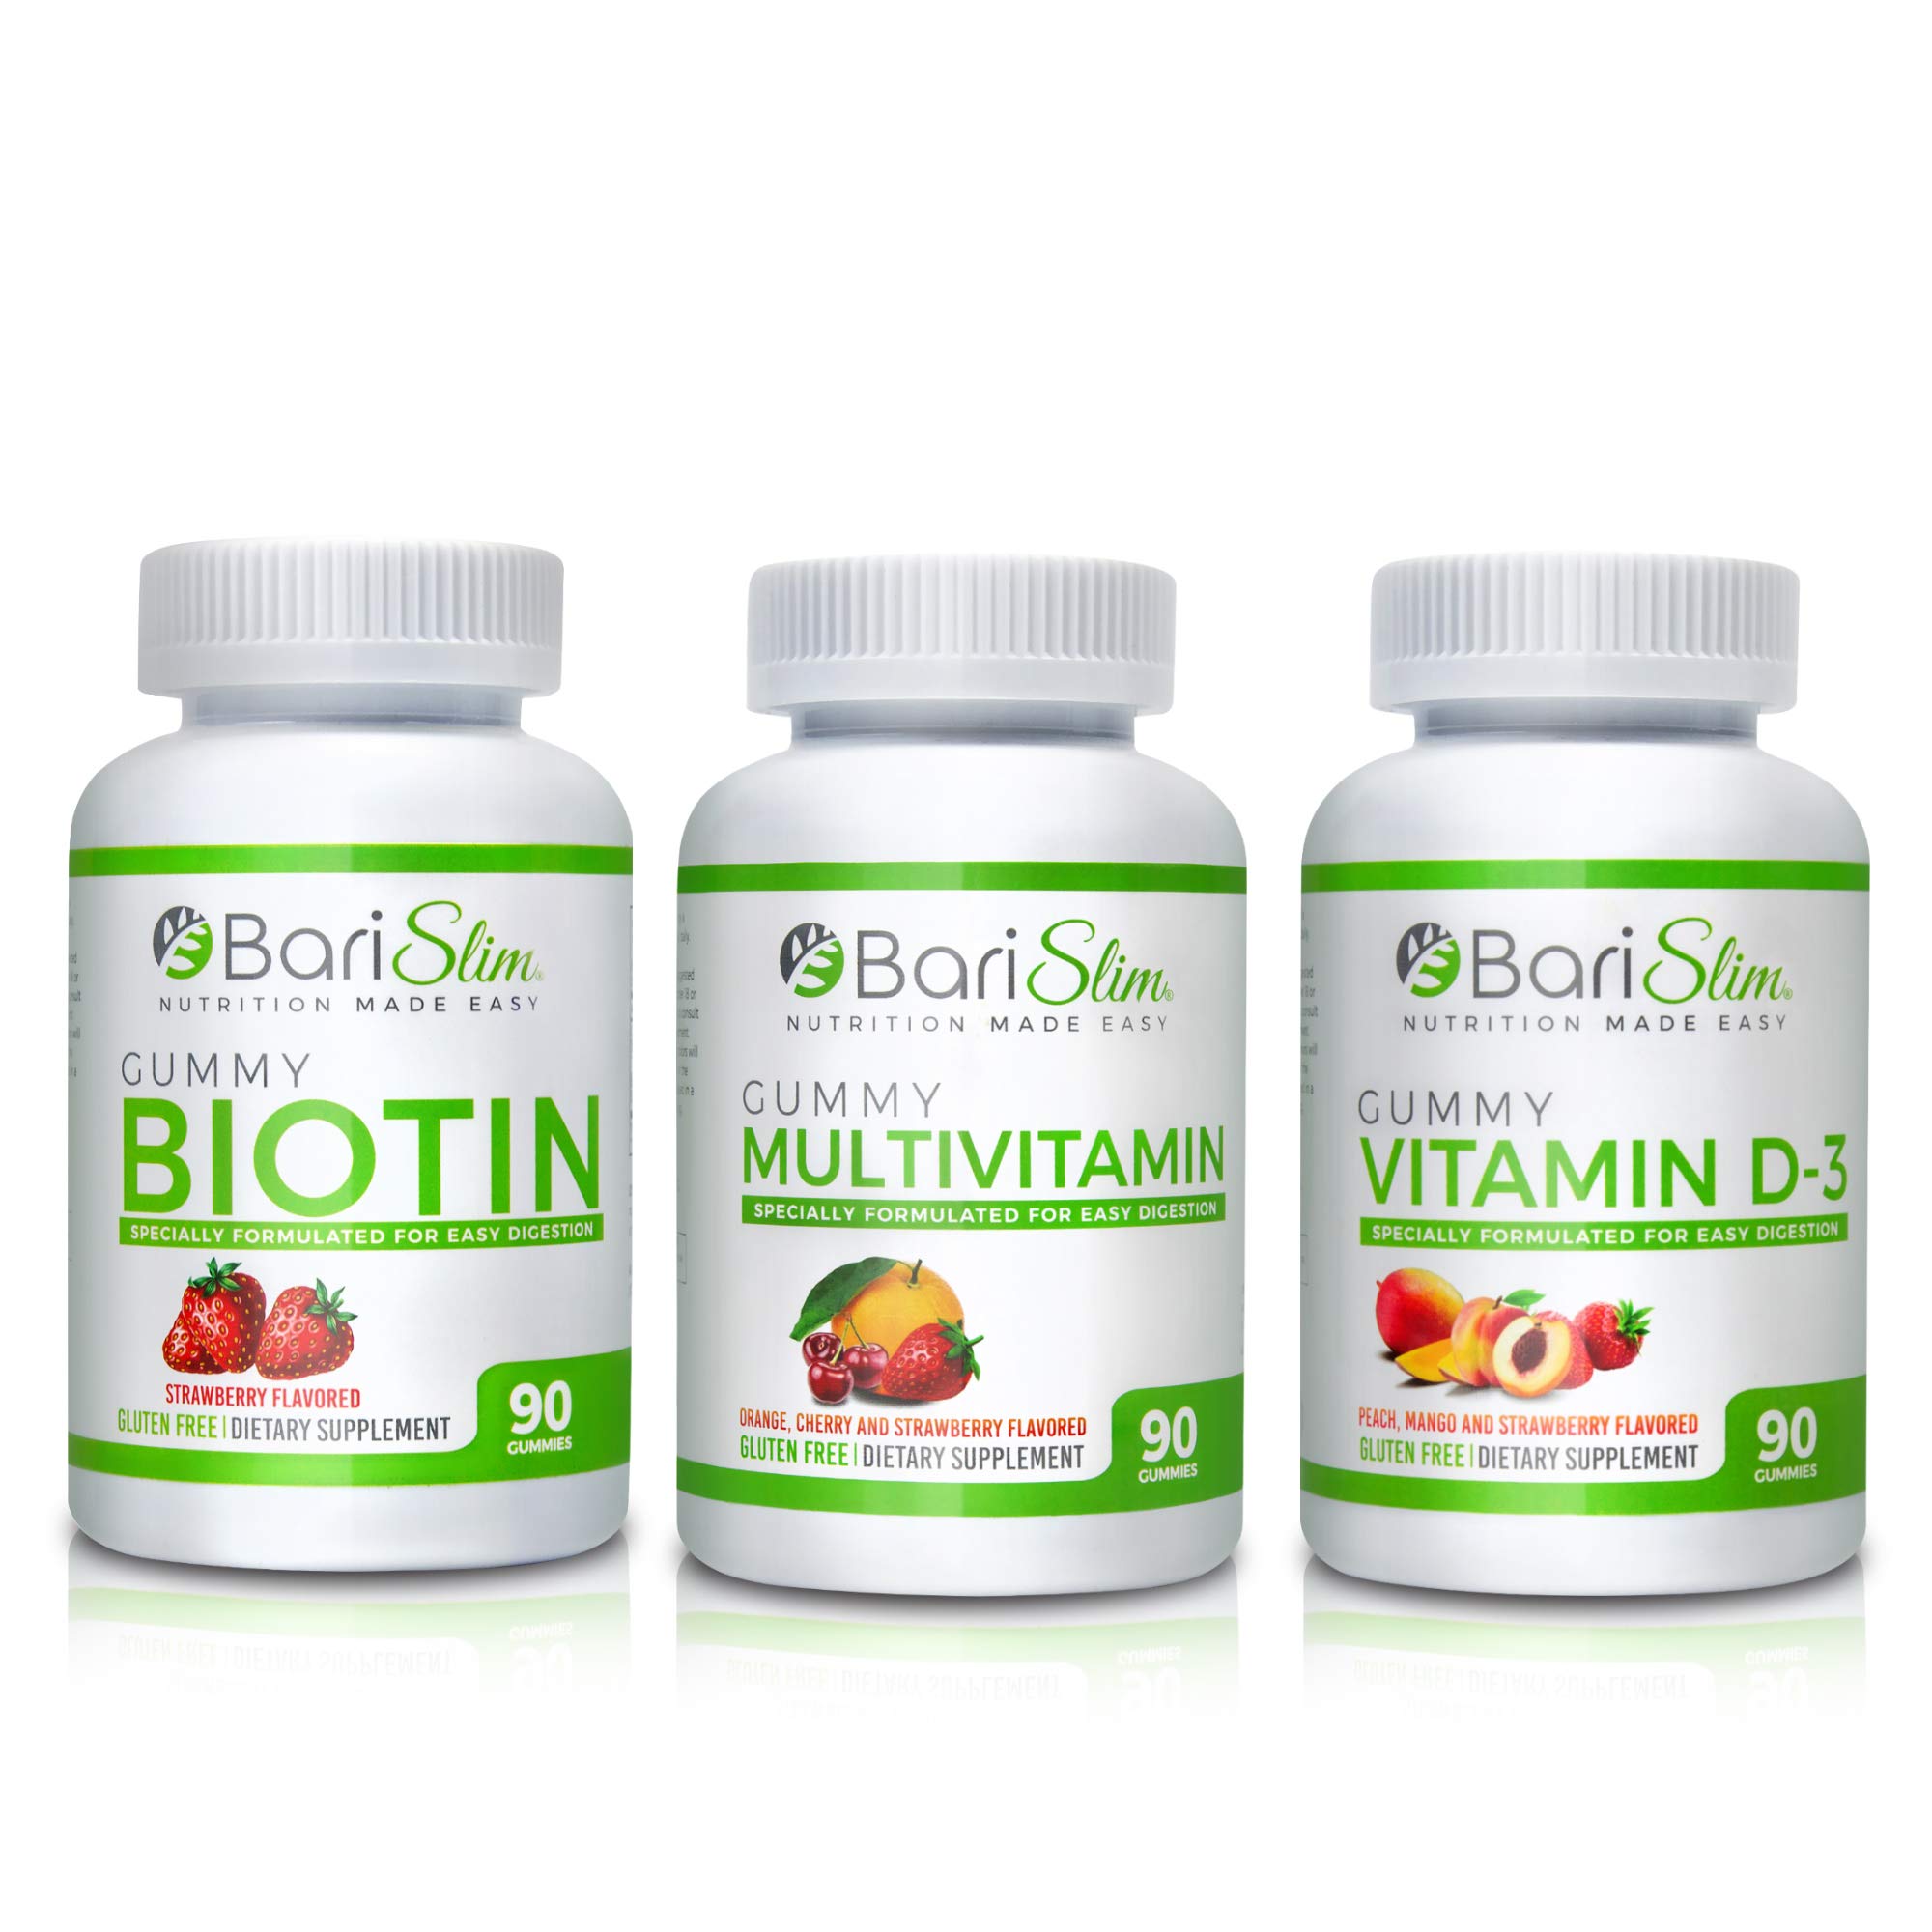 BariSlim Bariatric Multivitamin 3 Pack – (Multivitamin, Biotin, and D3) - Specially Formulated Gummy Vitamins for Patients After Weight Loss Surger...